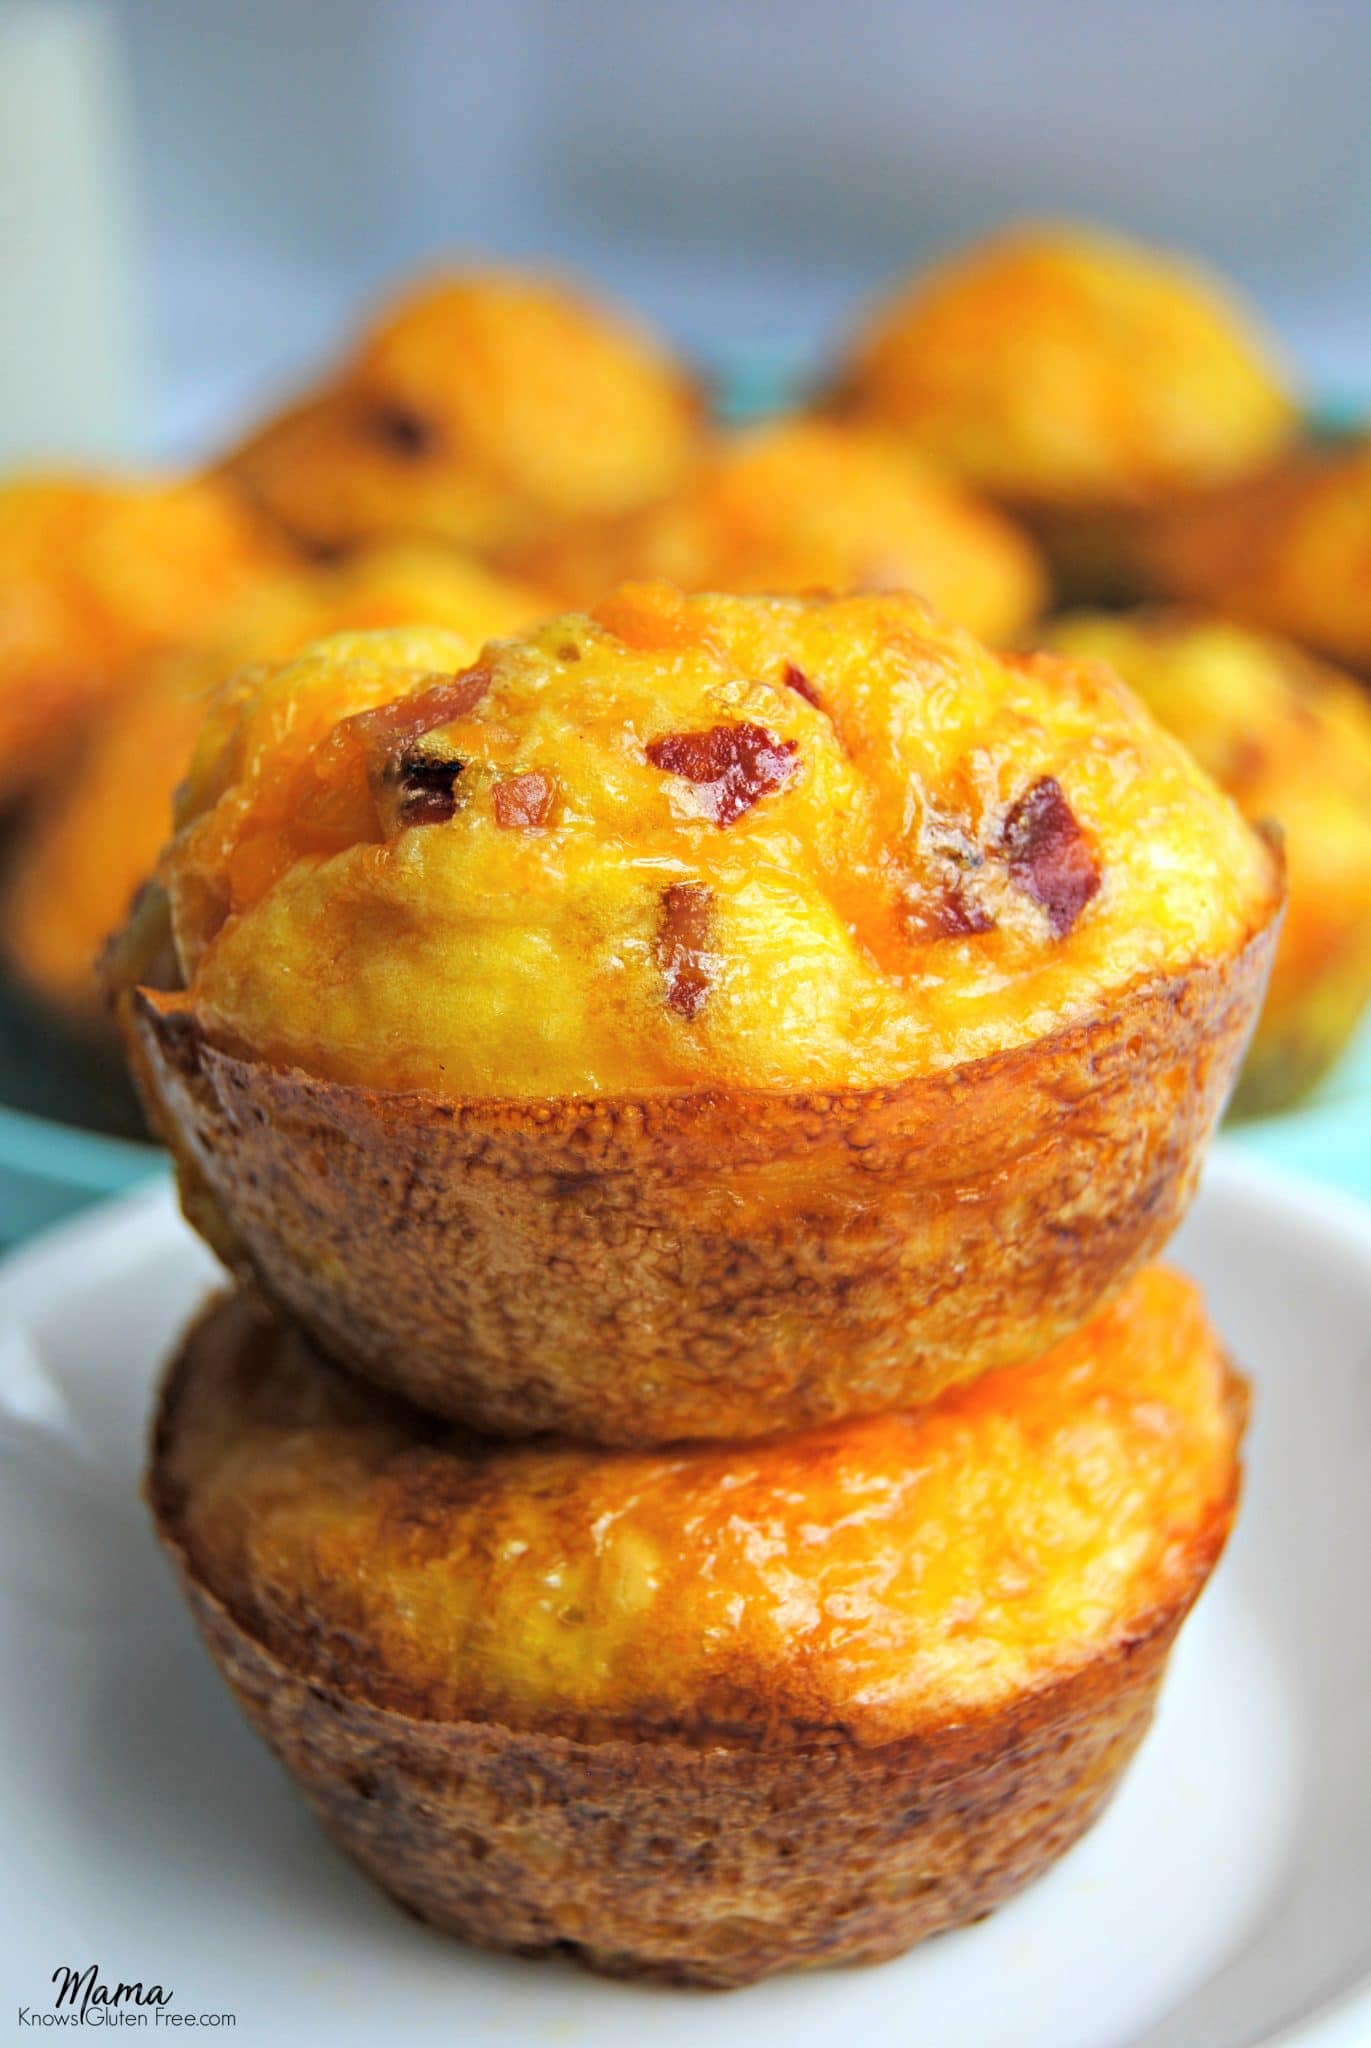 Hash Brown Egg Cups | www.mamaknowsglutenfree.com